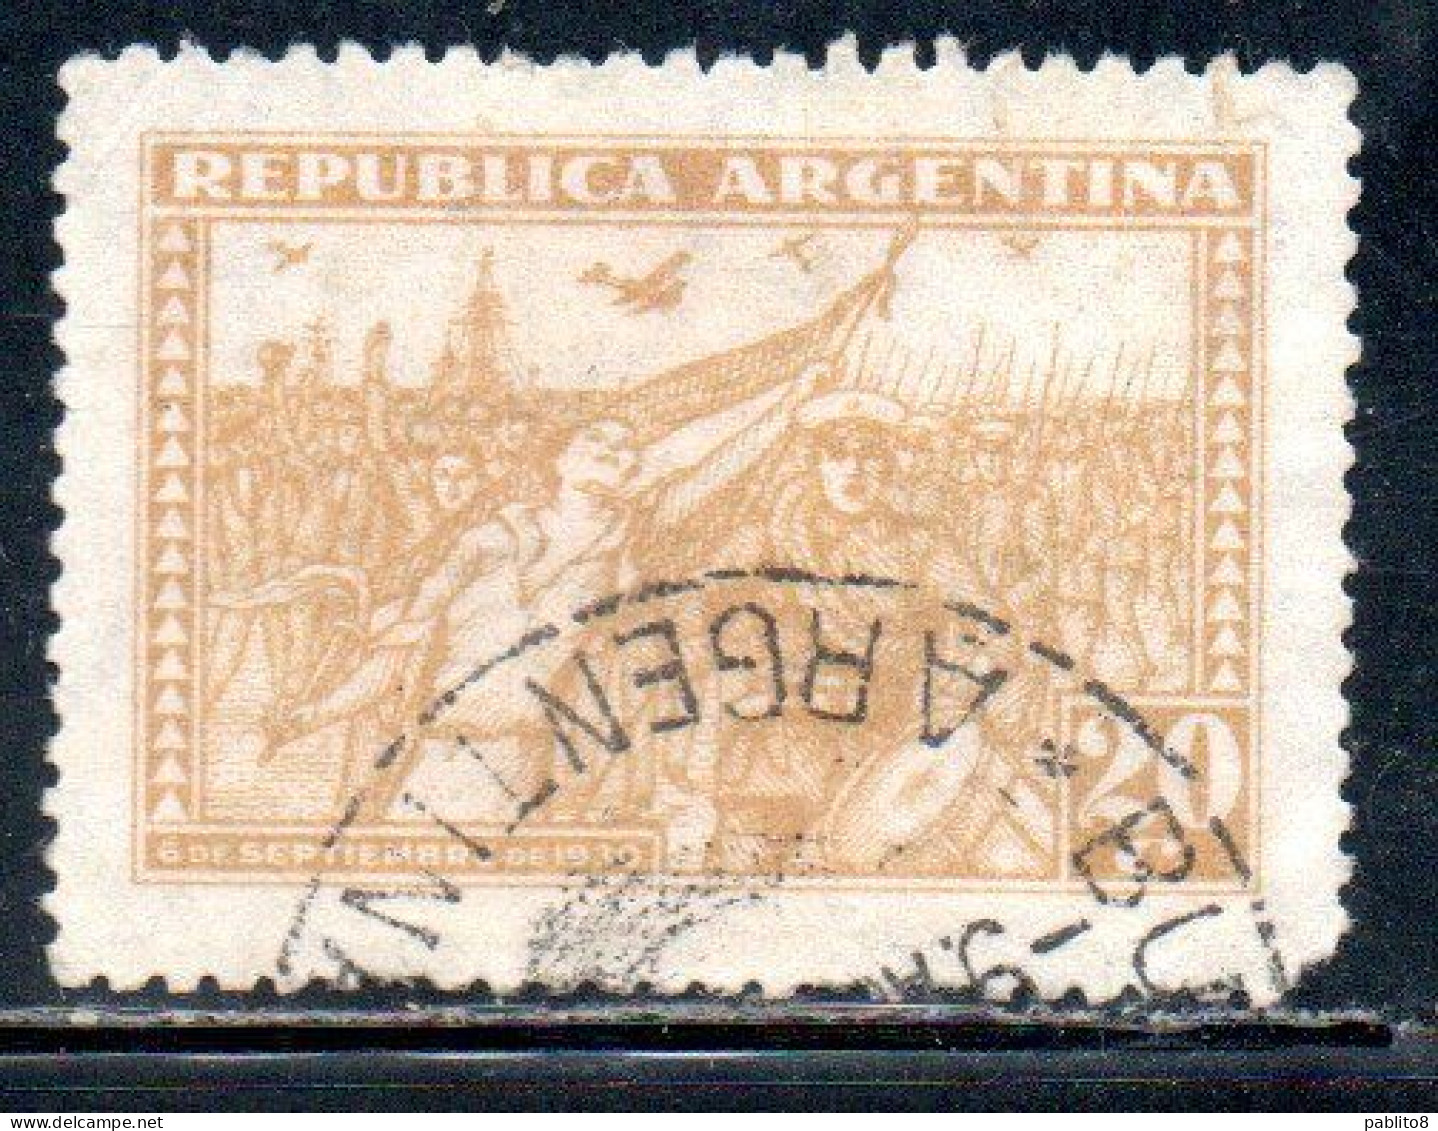 ARGENTINA 1930 REVOLUTION OF 1930 MARCH OF THE VICTORIOUS INSURGENS 20c USED USADO OBLITERE' - Oblitérés